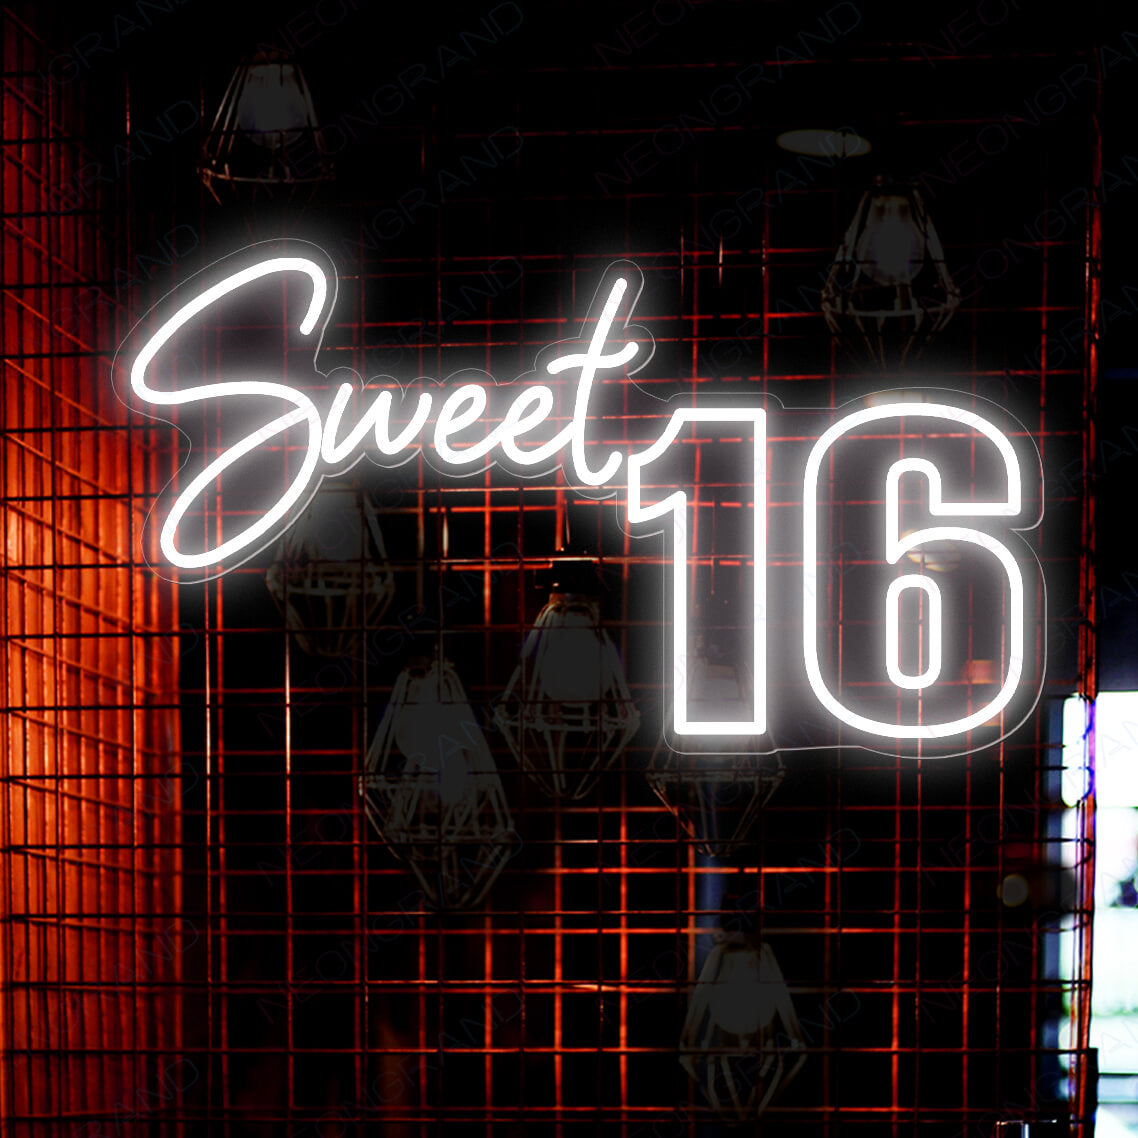 Sweet 16 Neon Sign Happy Birthday Party Led Light